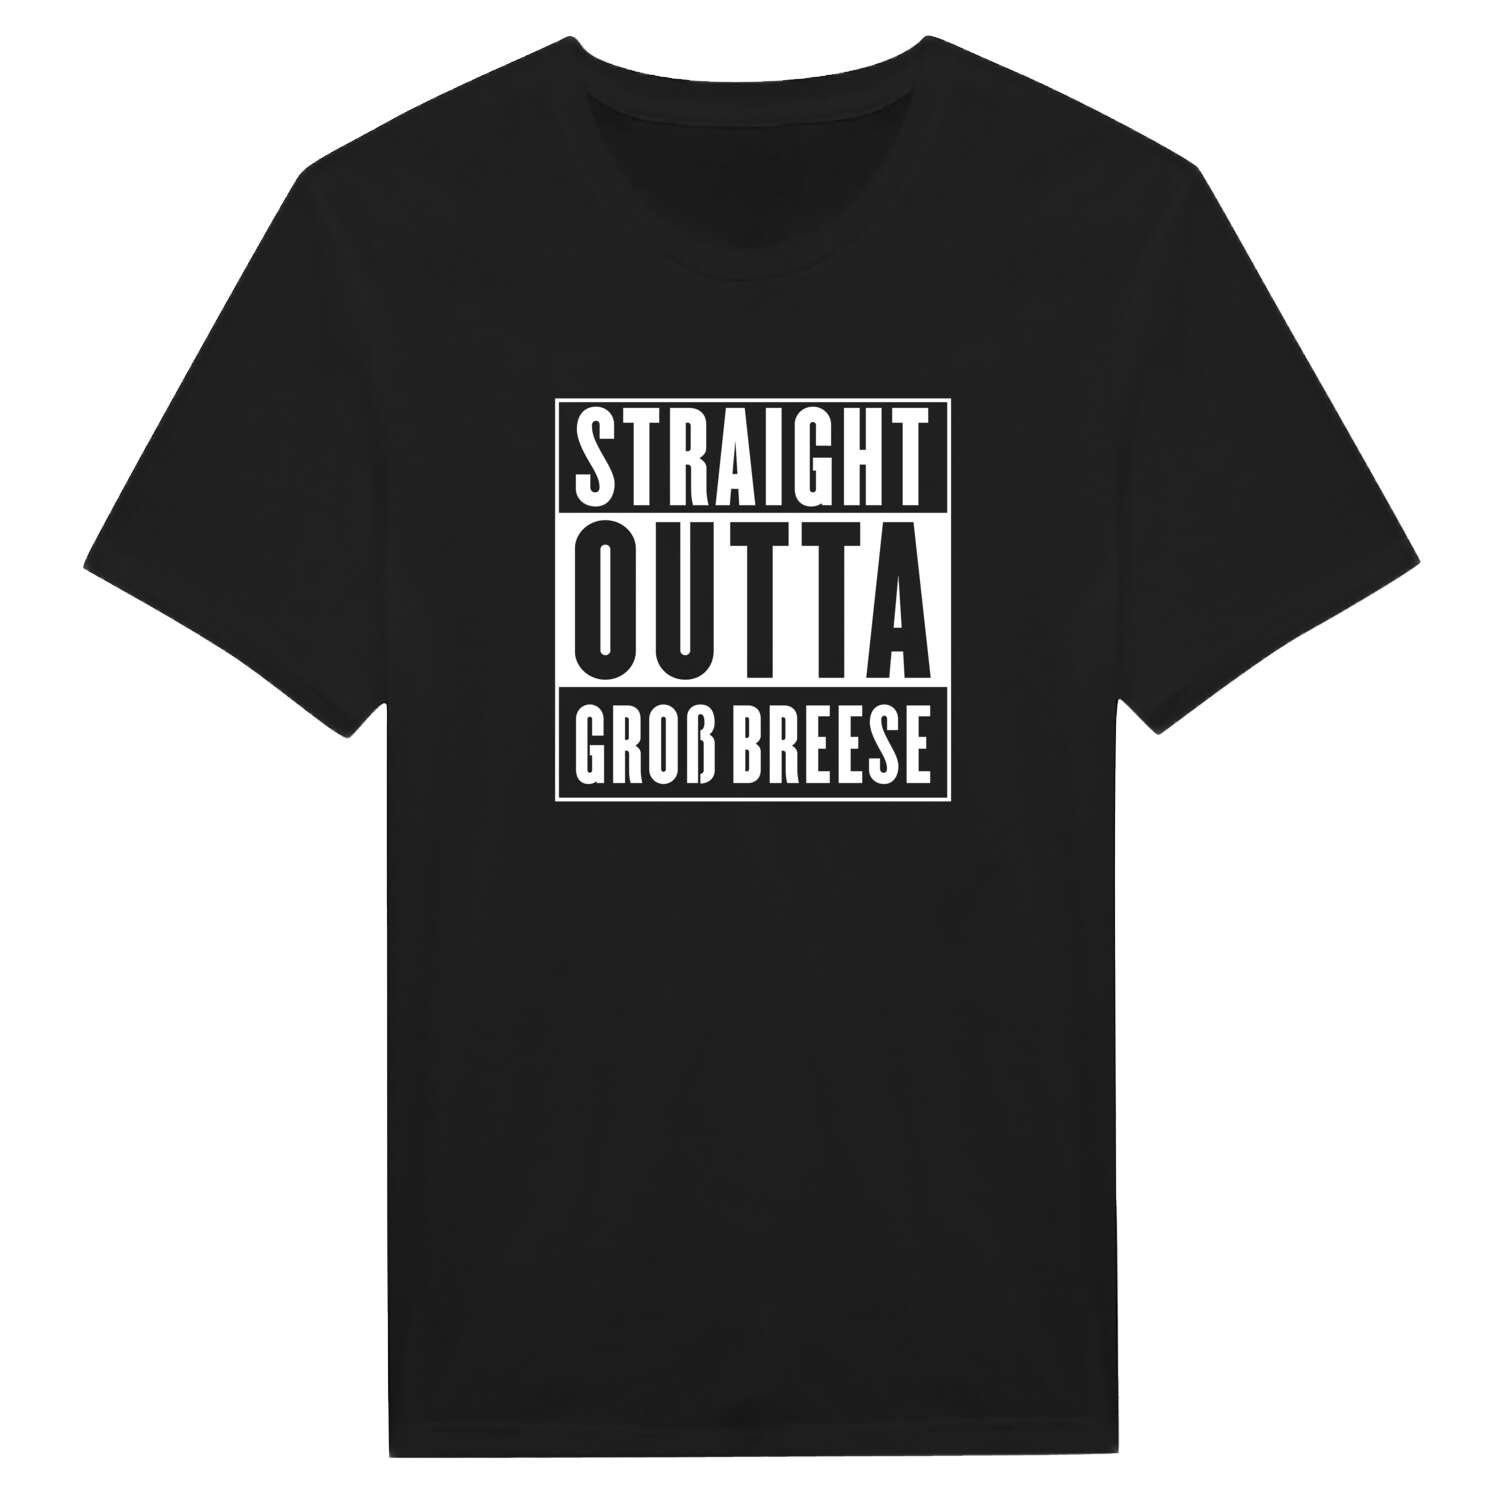 Groß Breese T-Shirt »Straight Outta«